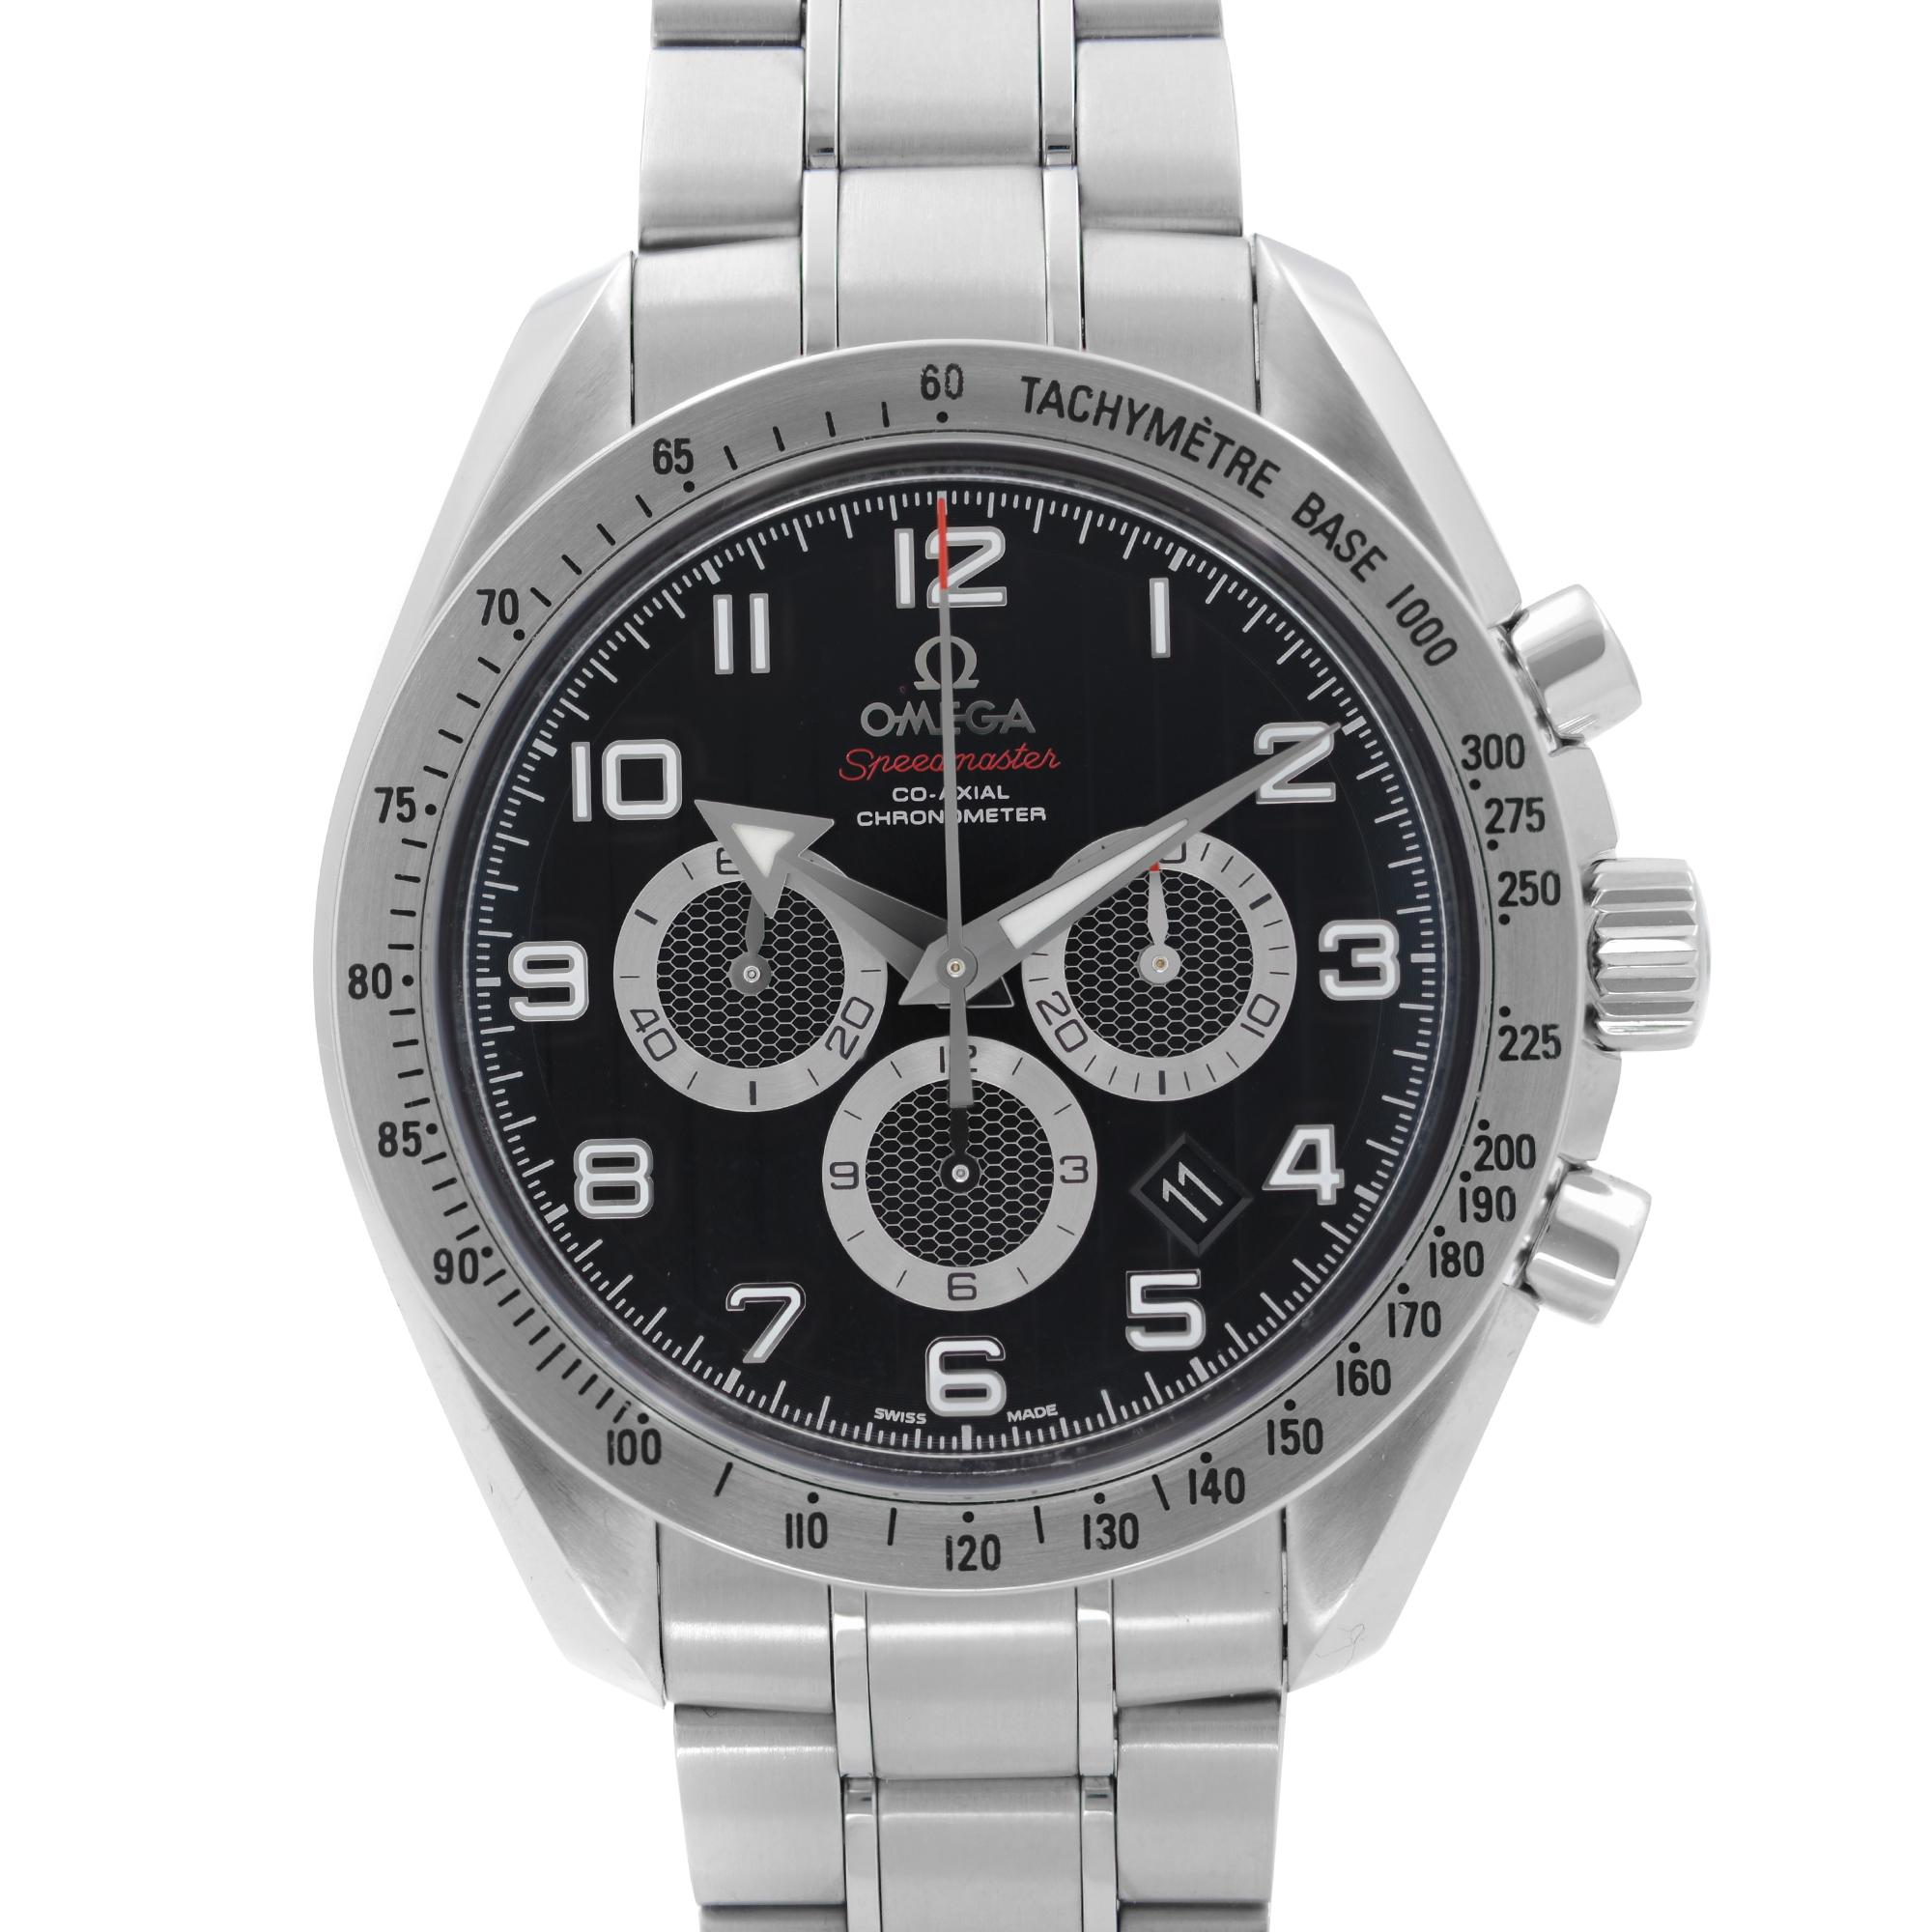 Store Display Omega Speedmaster 44mm Steel Black Dial Automatic Mens Watch 32110445001001. This Beautiful Timepiece is Powered by Mechanical (Automatic) Movement And Features: Round Stainless Steel Case and Bracelet, Fixed Stainless Steel Bezel Set